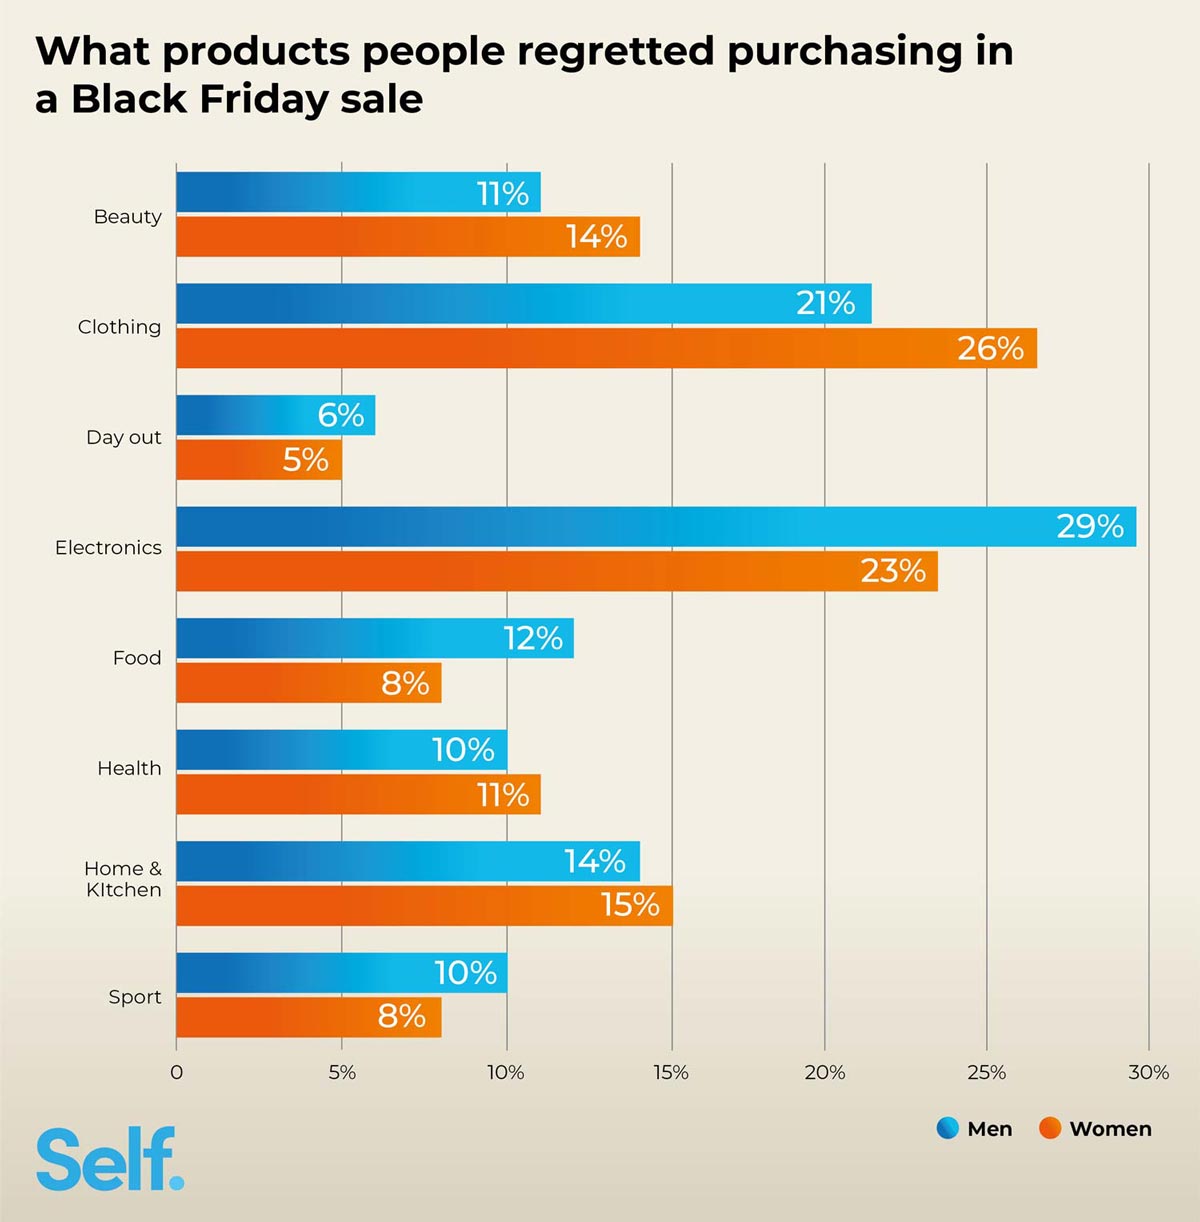 What products people regretted purchasing in a Black Friday sale